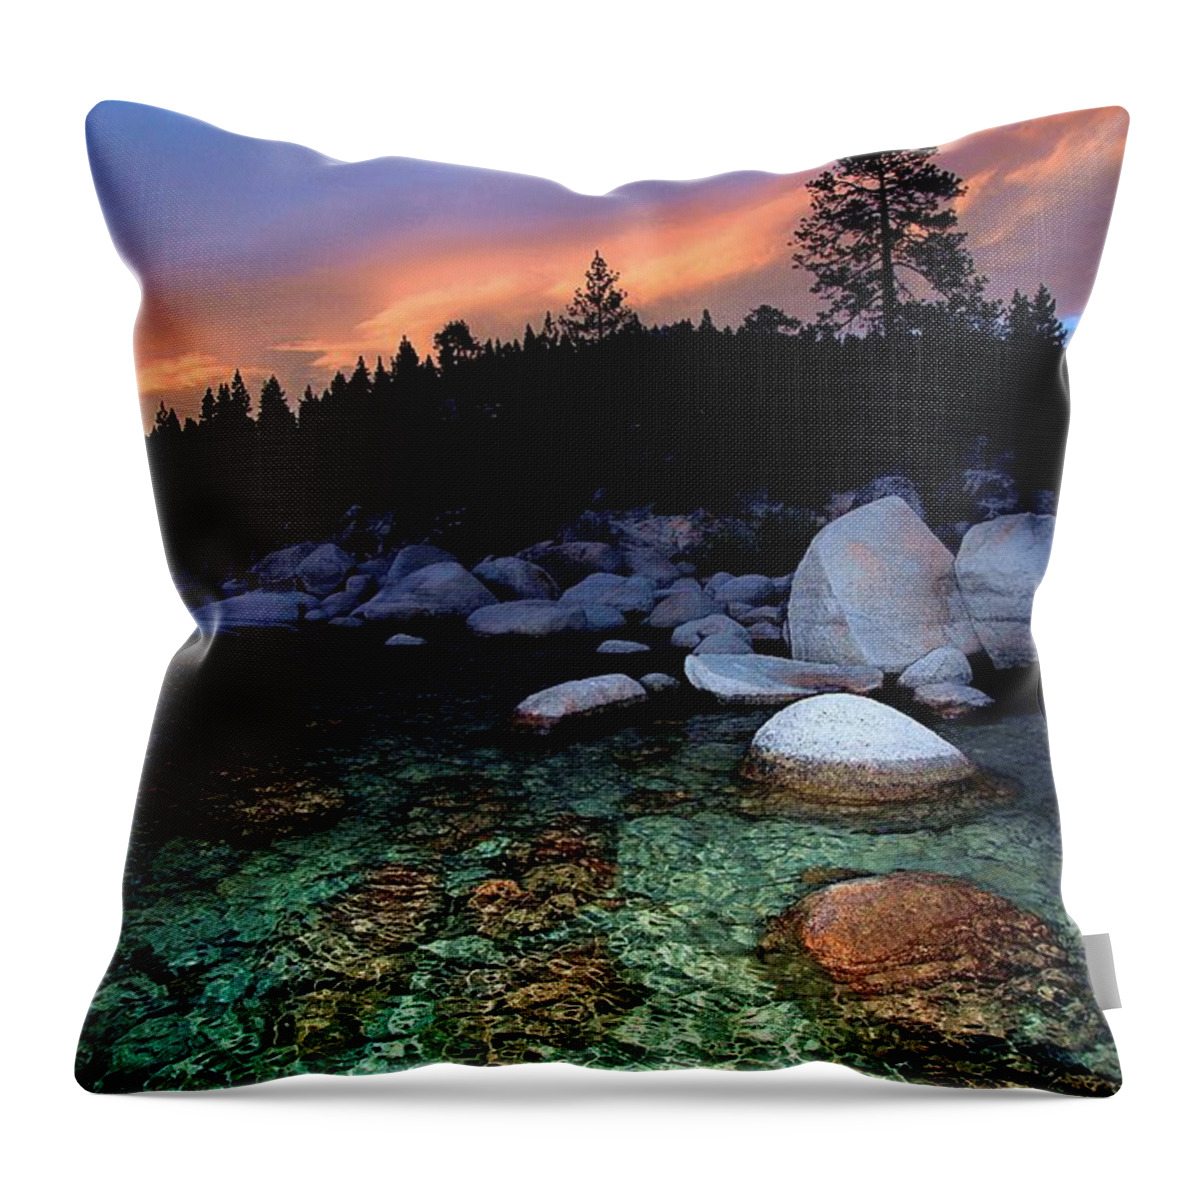 Lake Tahoe Throw Pillow featuring the photograph Lake Tahoe Nightlife by Sean Sarsfield